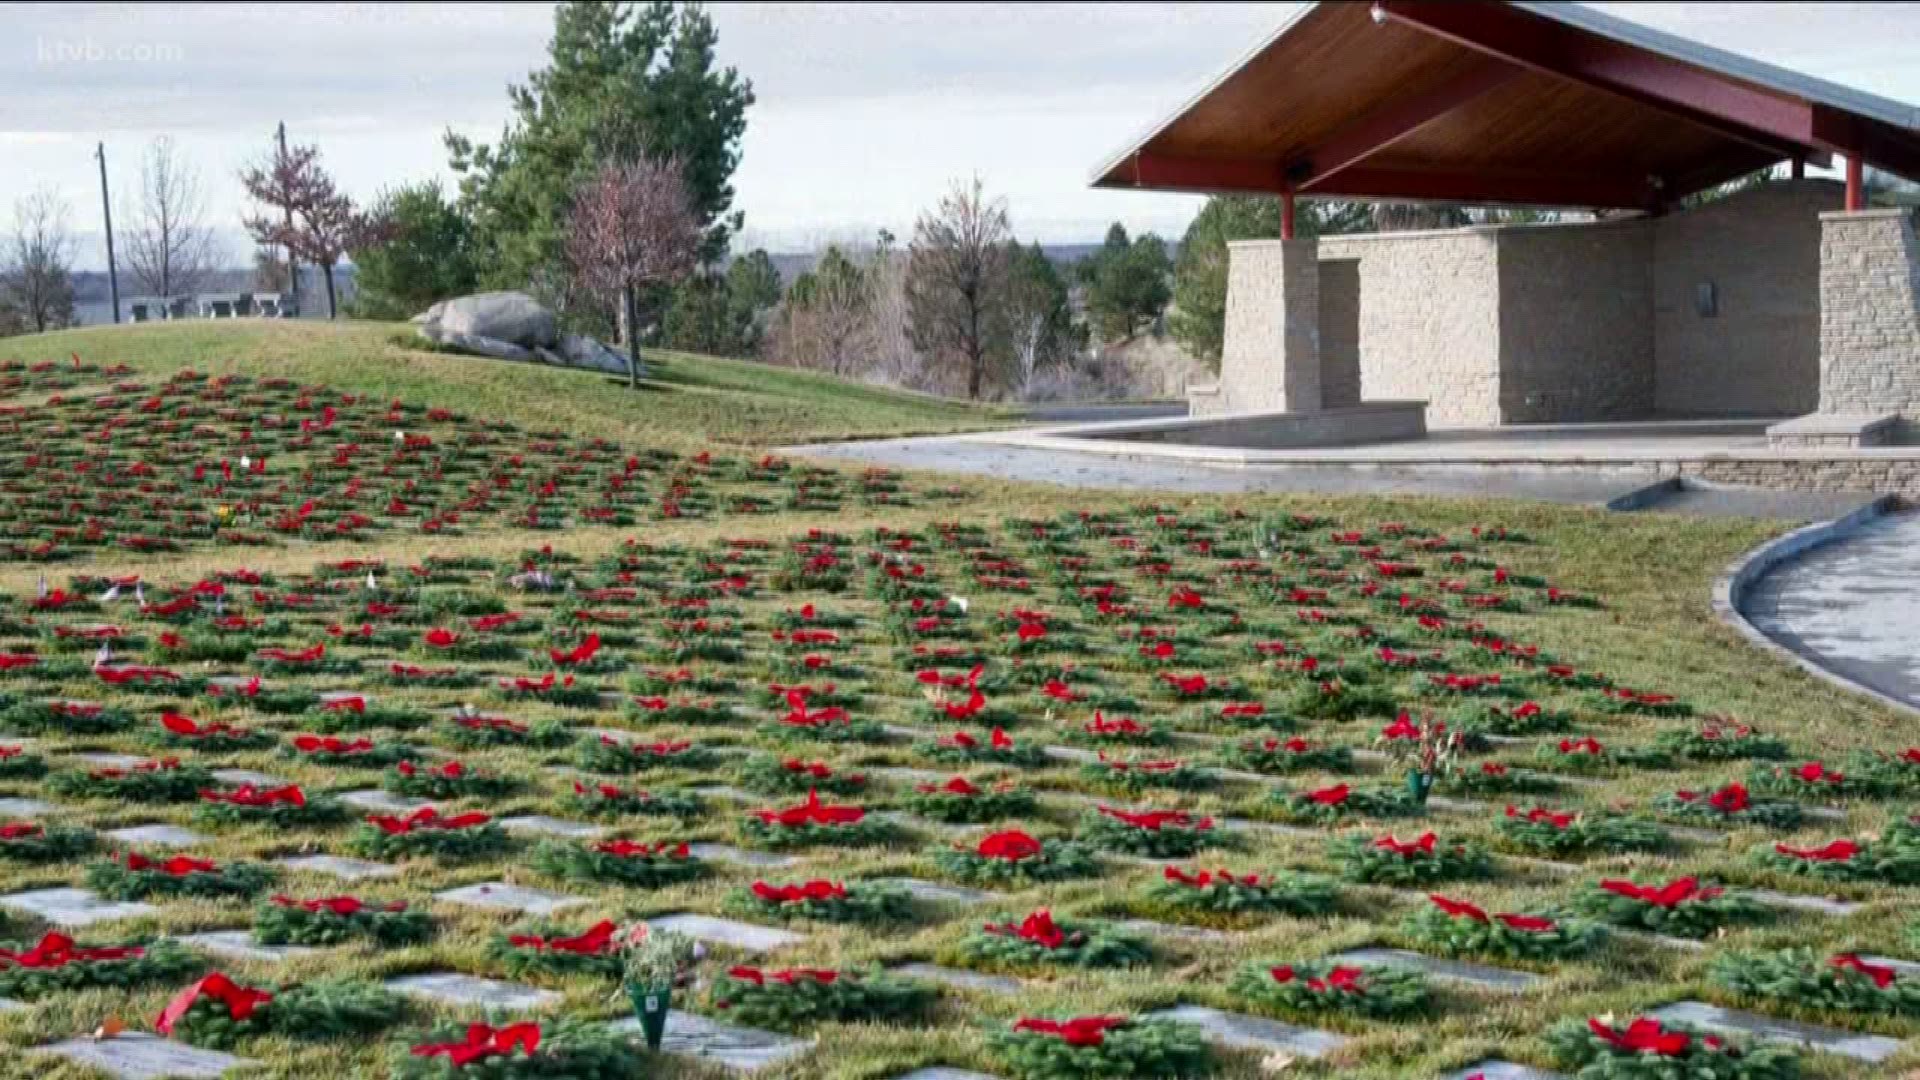 The goal is to place a wreath at every veteran's grave site across America.